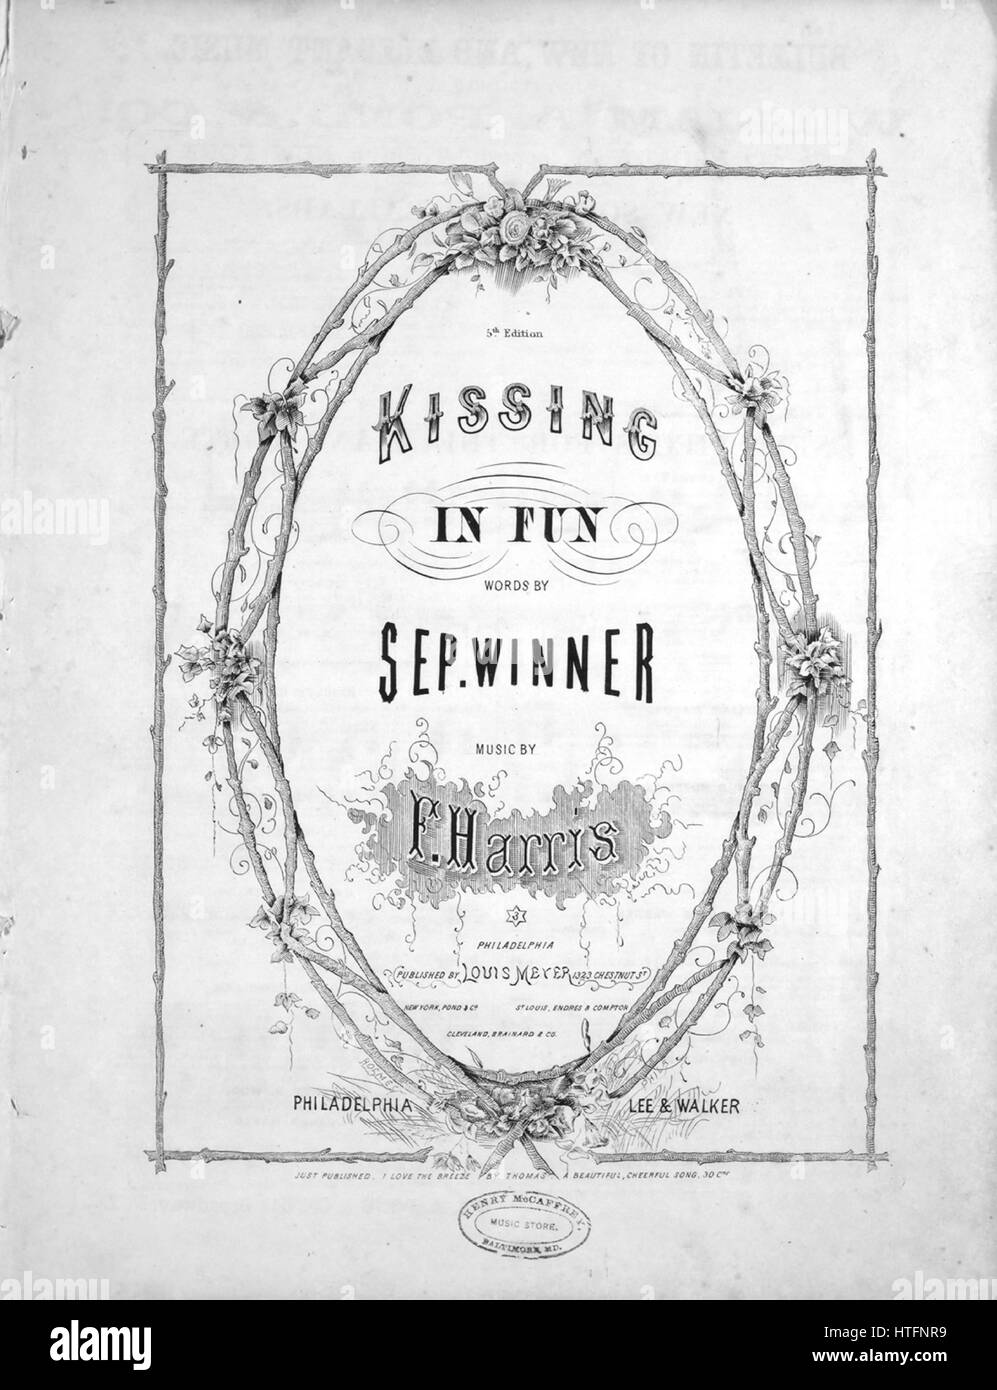 Sheet music cover image of the song 'Kissing In Fun Fifth Edition', with original authorship notes reading 'Words By Sep Winner Music By F Harris', United States, 1864. The publisher is listed as 'Louis Meyer, 1323 Chestnut St.', the form of composition is 'strophic with refrain', the instrumentation is 'piano and voice', the first line reads 'Young Joe was as nice a man as any in the land First line of refrain Yet once he had the impudence to kiss me just in fun', and the illustration artist is listed as 'Holmes'. Stock Photo